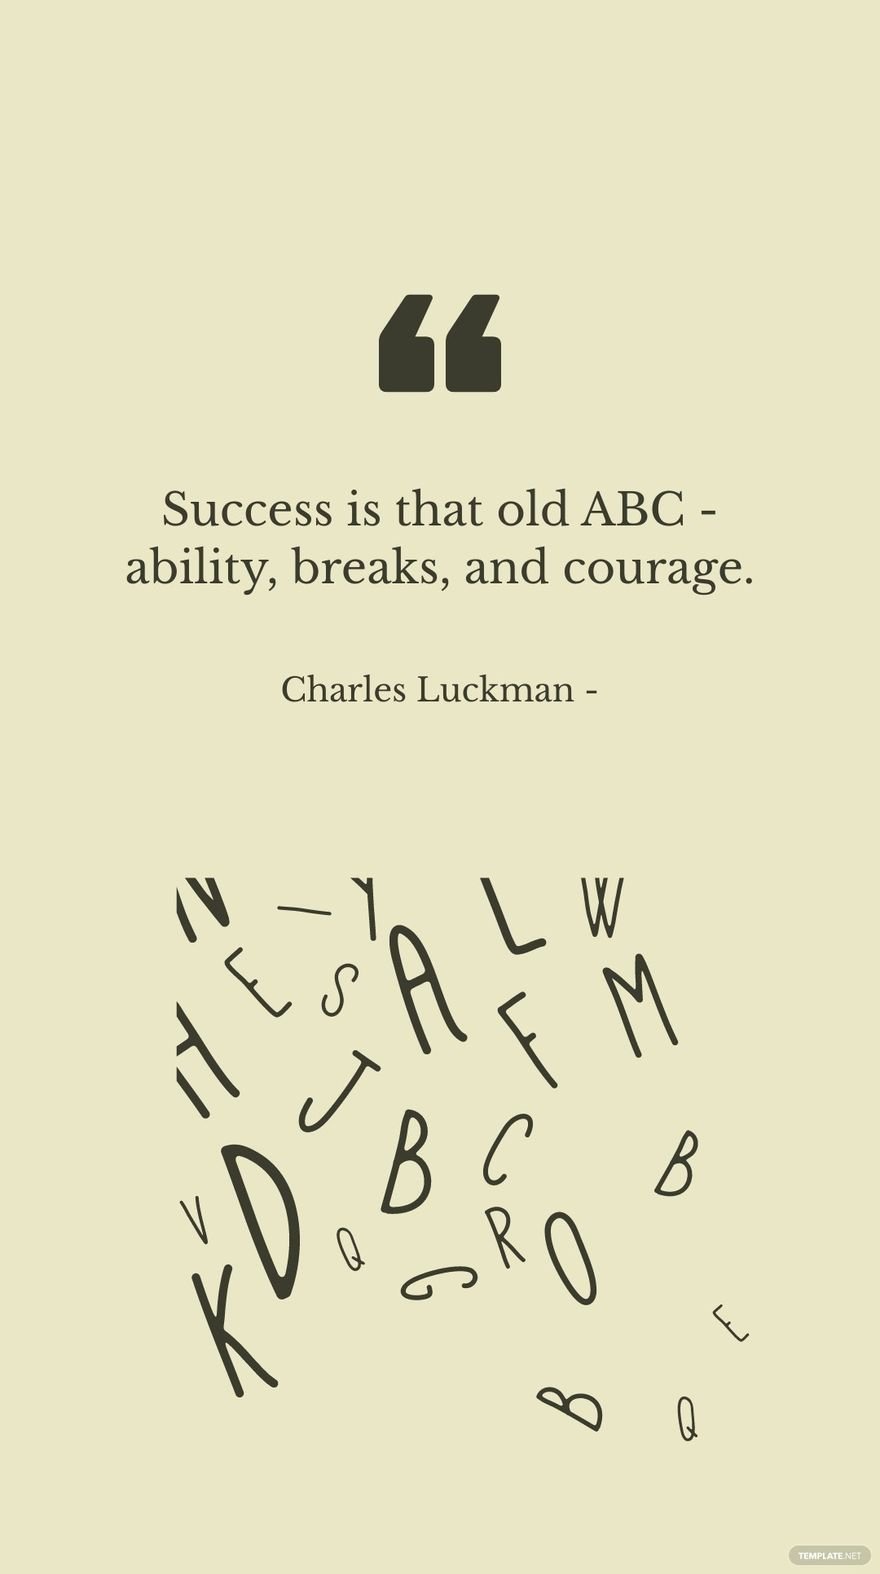 Charles Luckman - Success is that old ABC - ability, breaks, and courage. in JPG